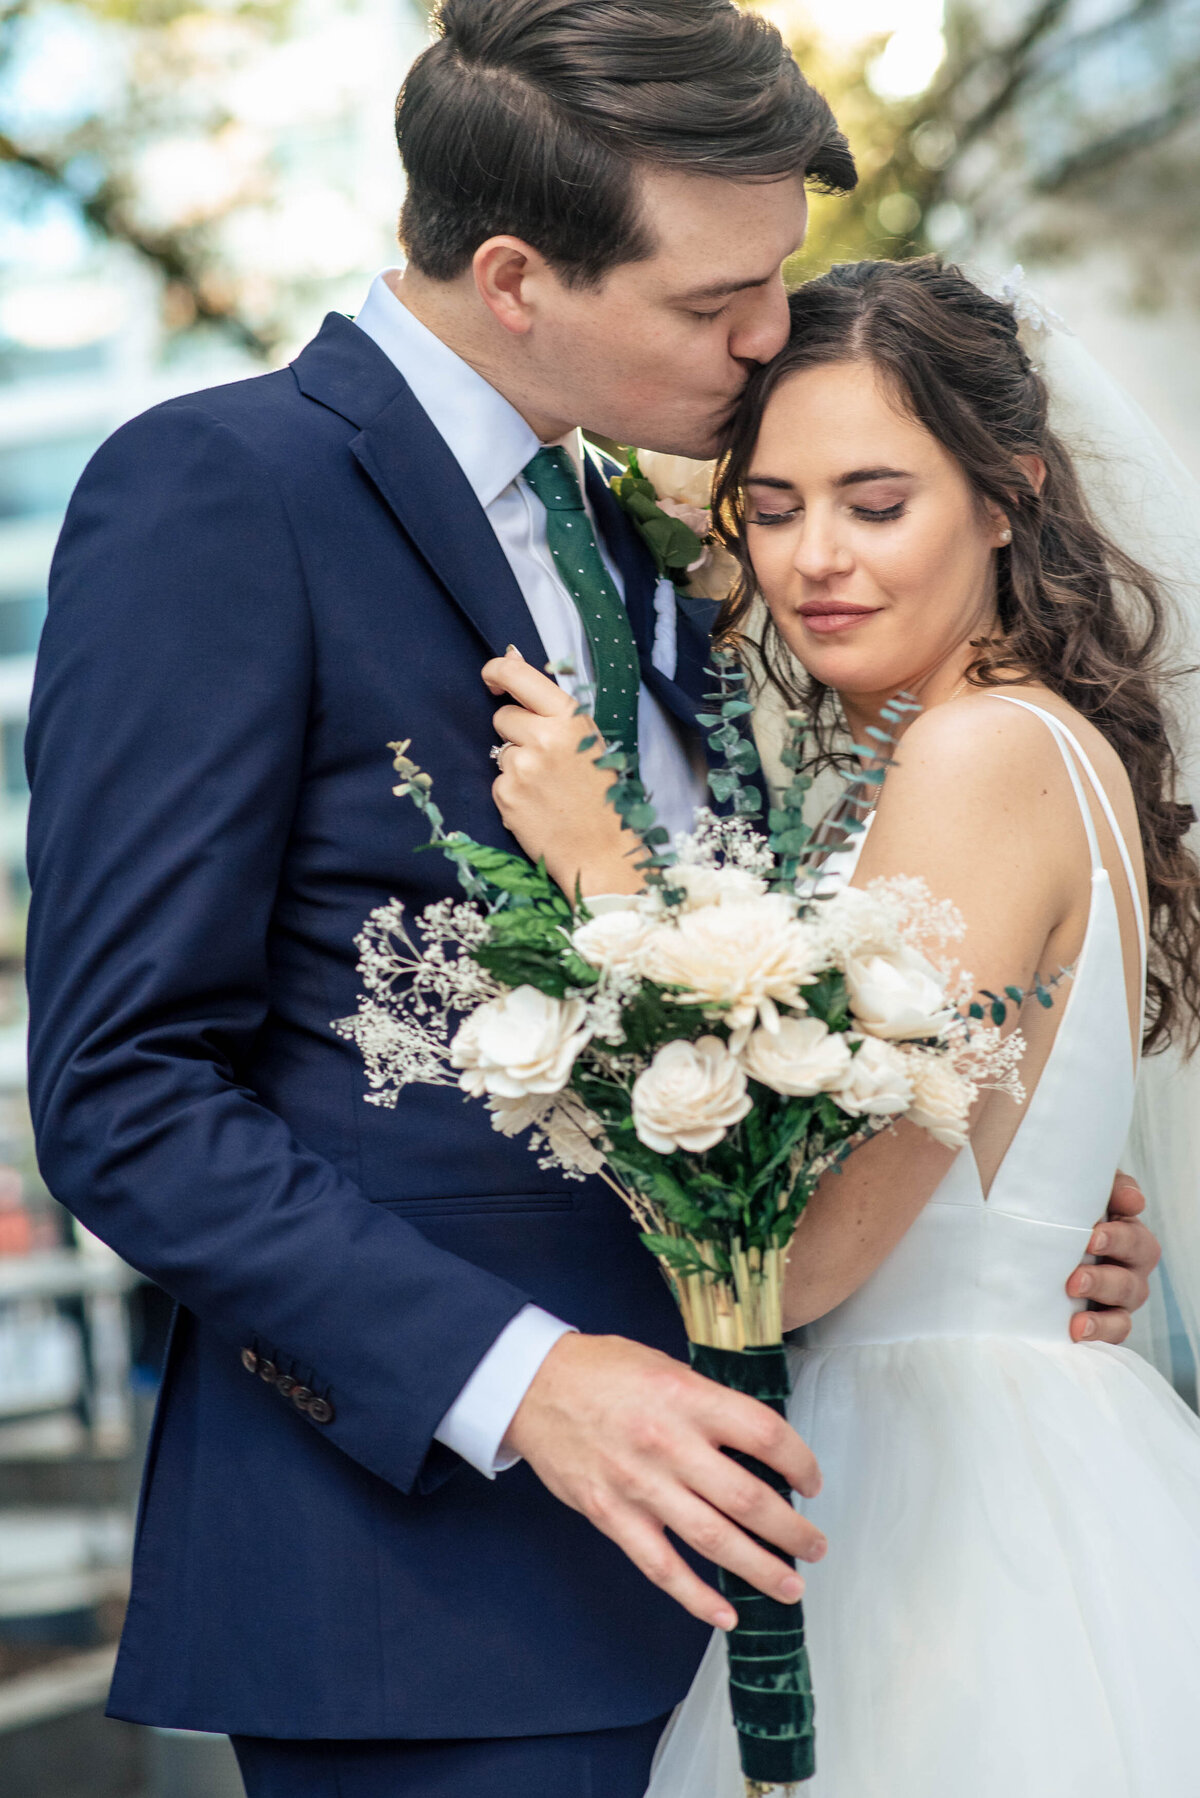 Upclose-portrait-of-a-bride-holding-her-groom's-jacket-lapel-as-he-pulls-her-in-and-kisses-her-head